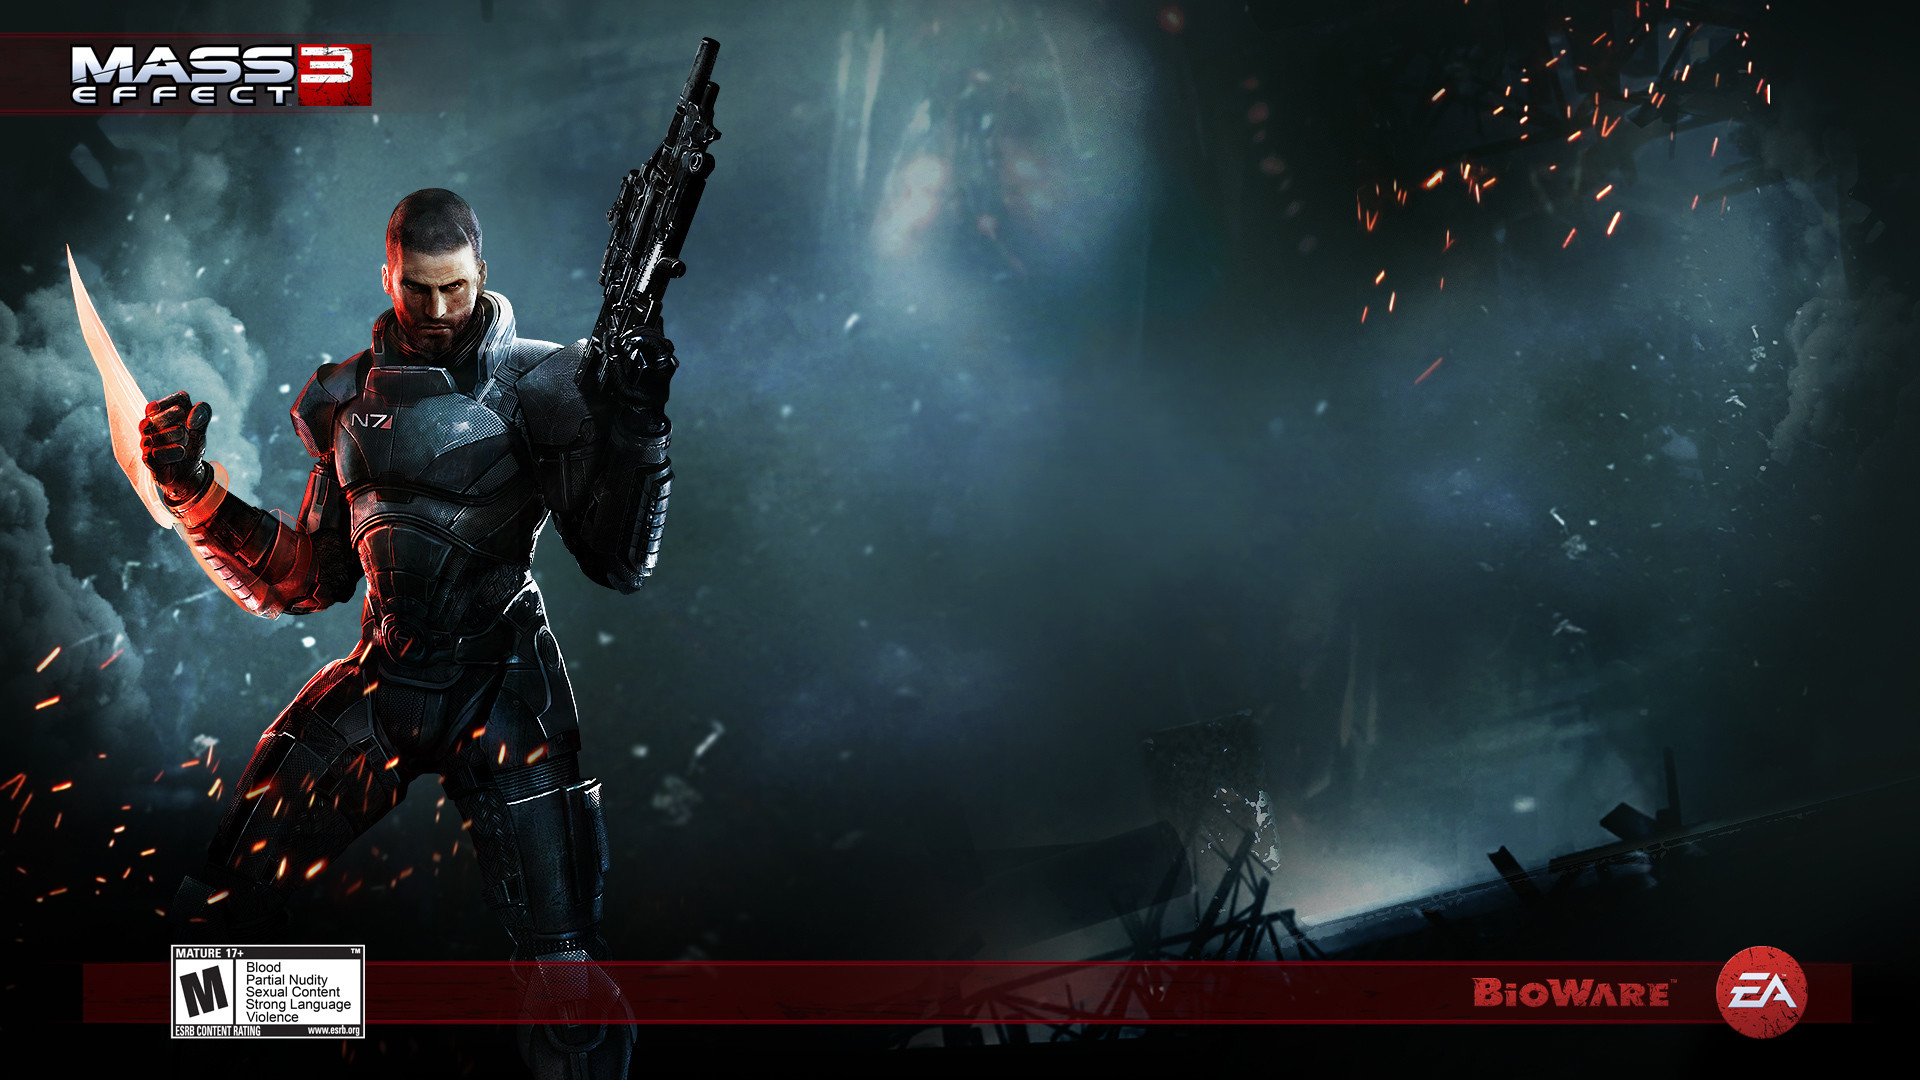 1920x1080 Action Game Mass Effect 3